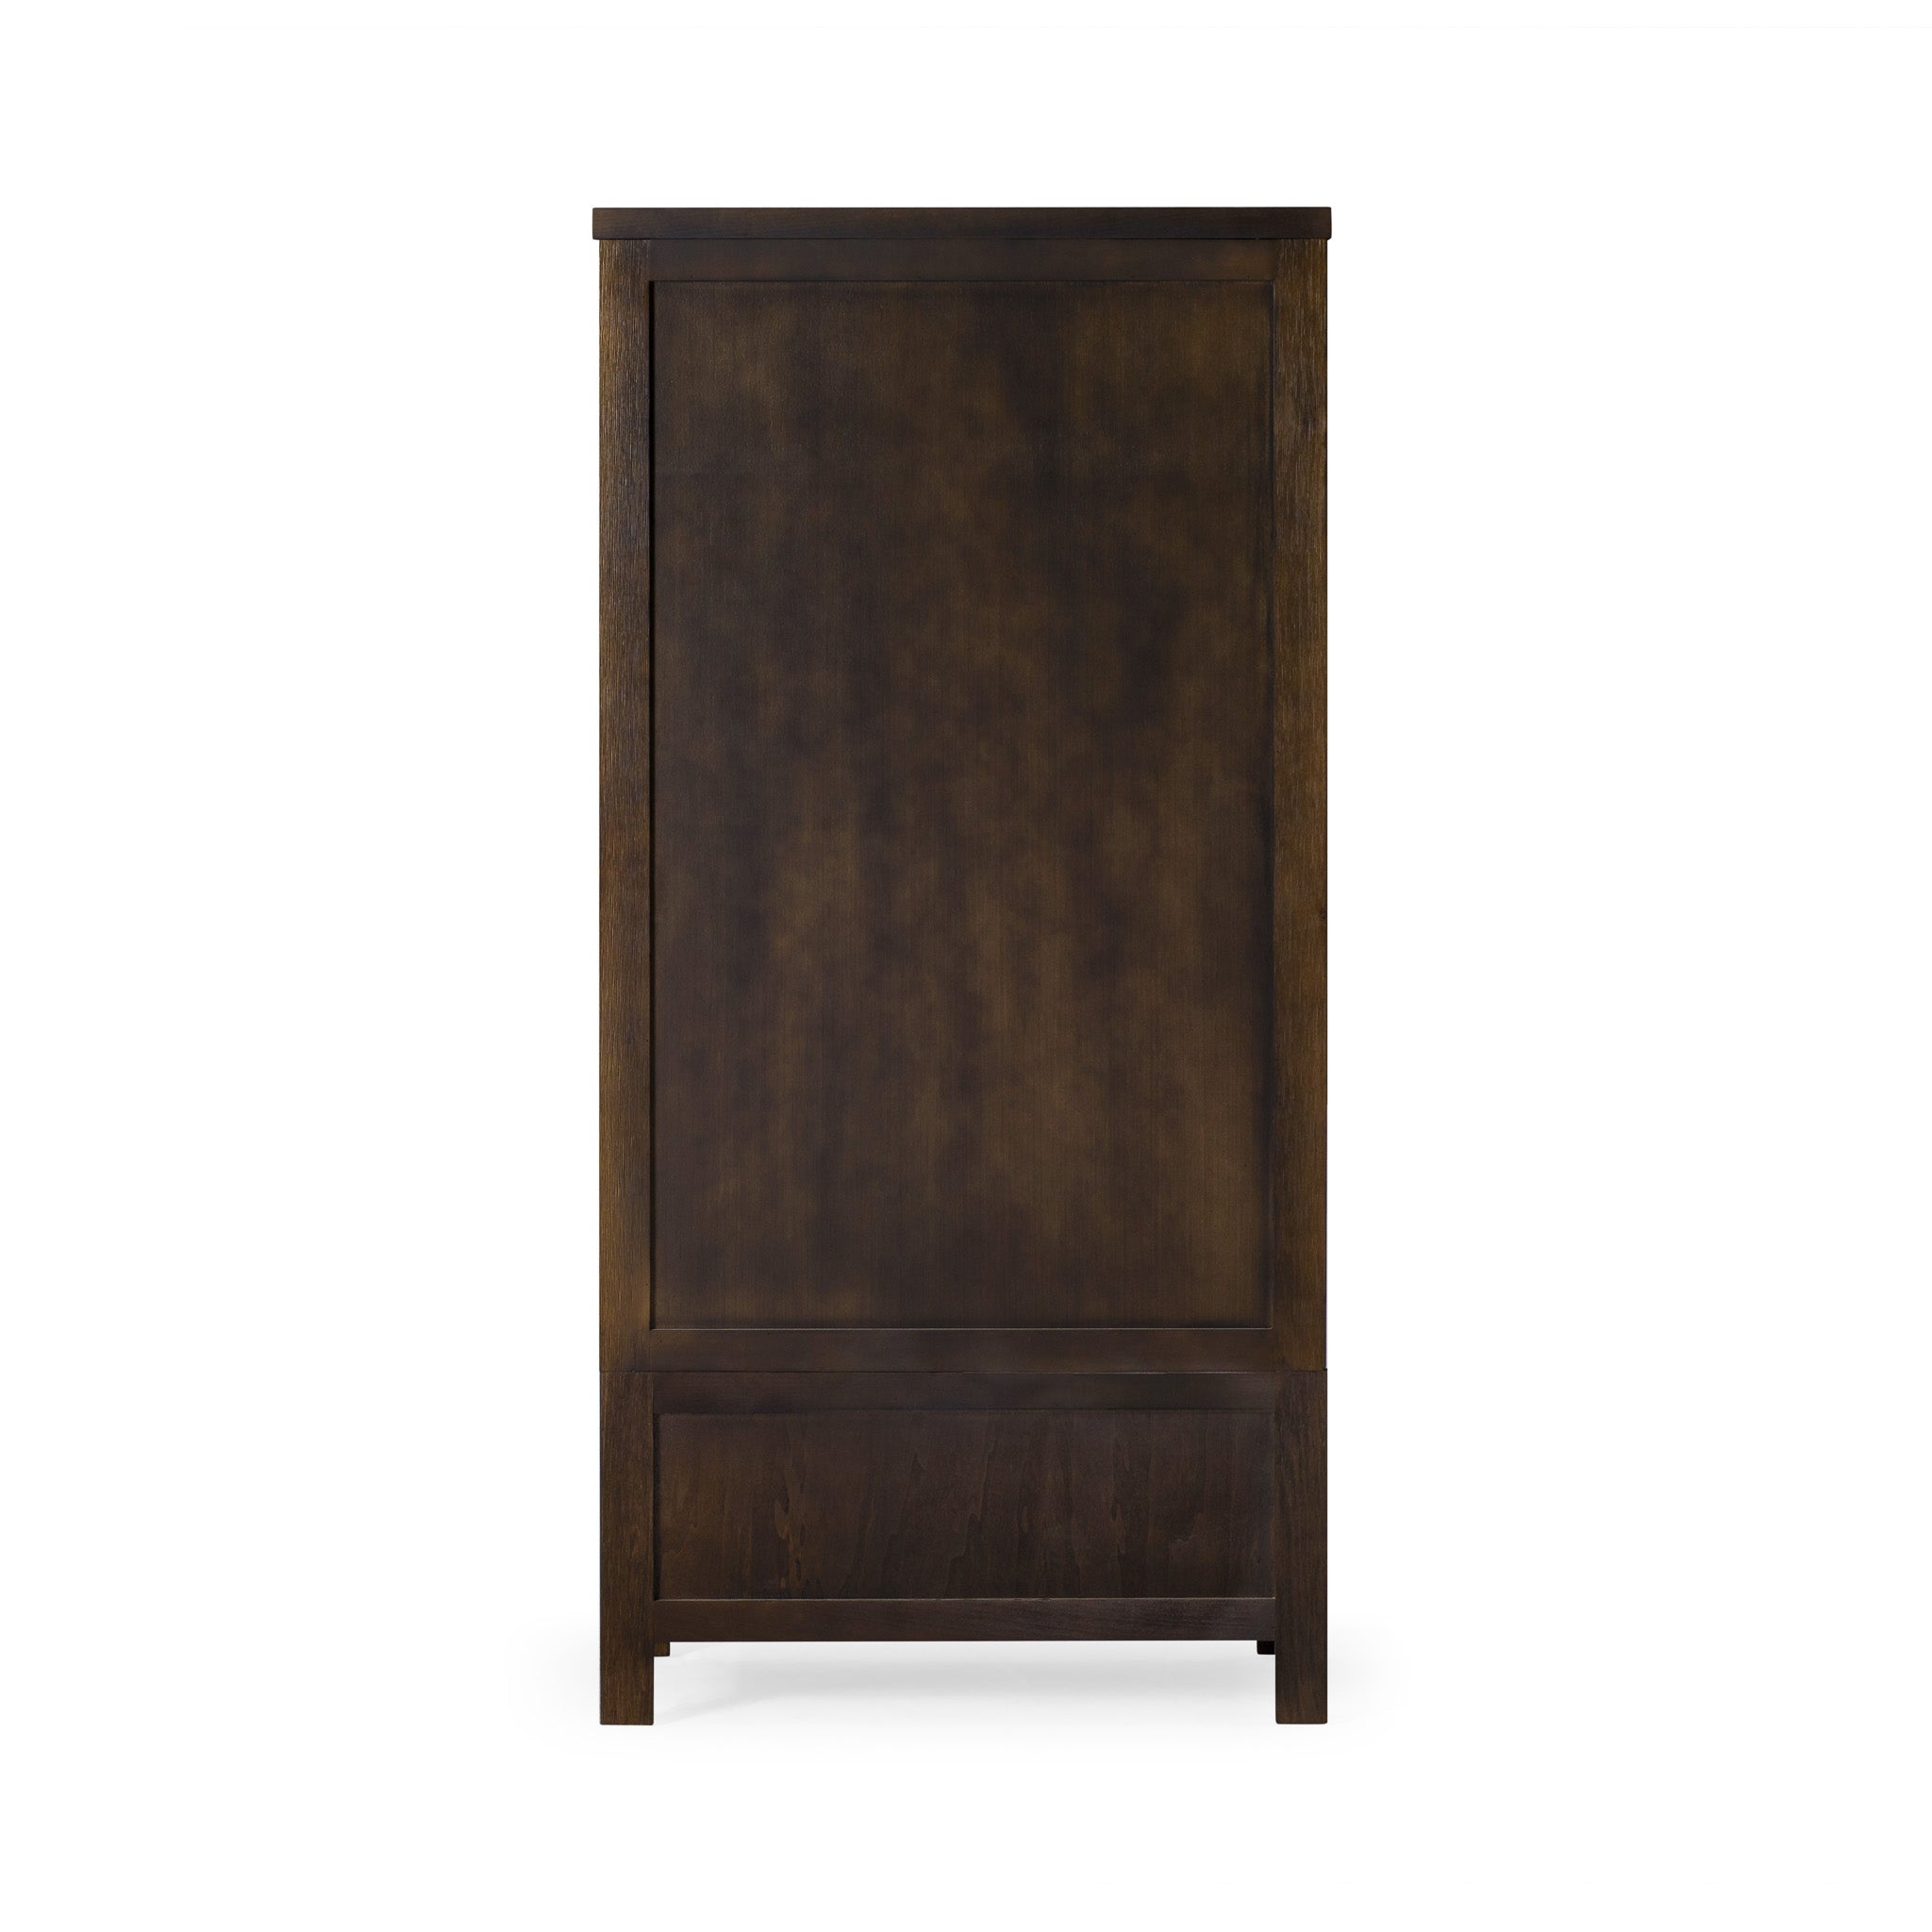 Vaughn Organic Wooden Cabinet in Weathered Brown Finish in Cabinets by Maven Lane